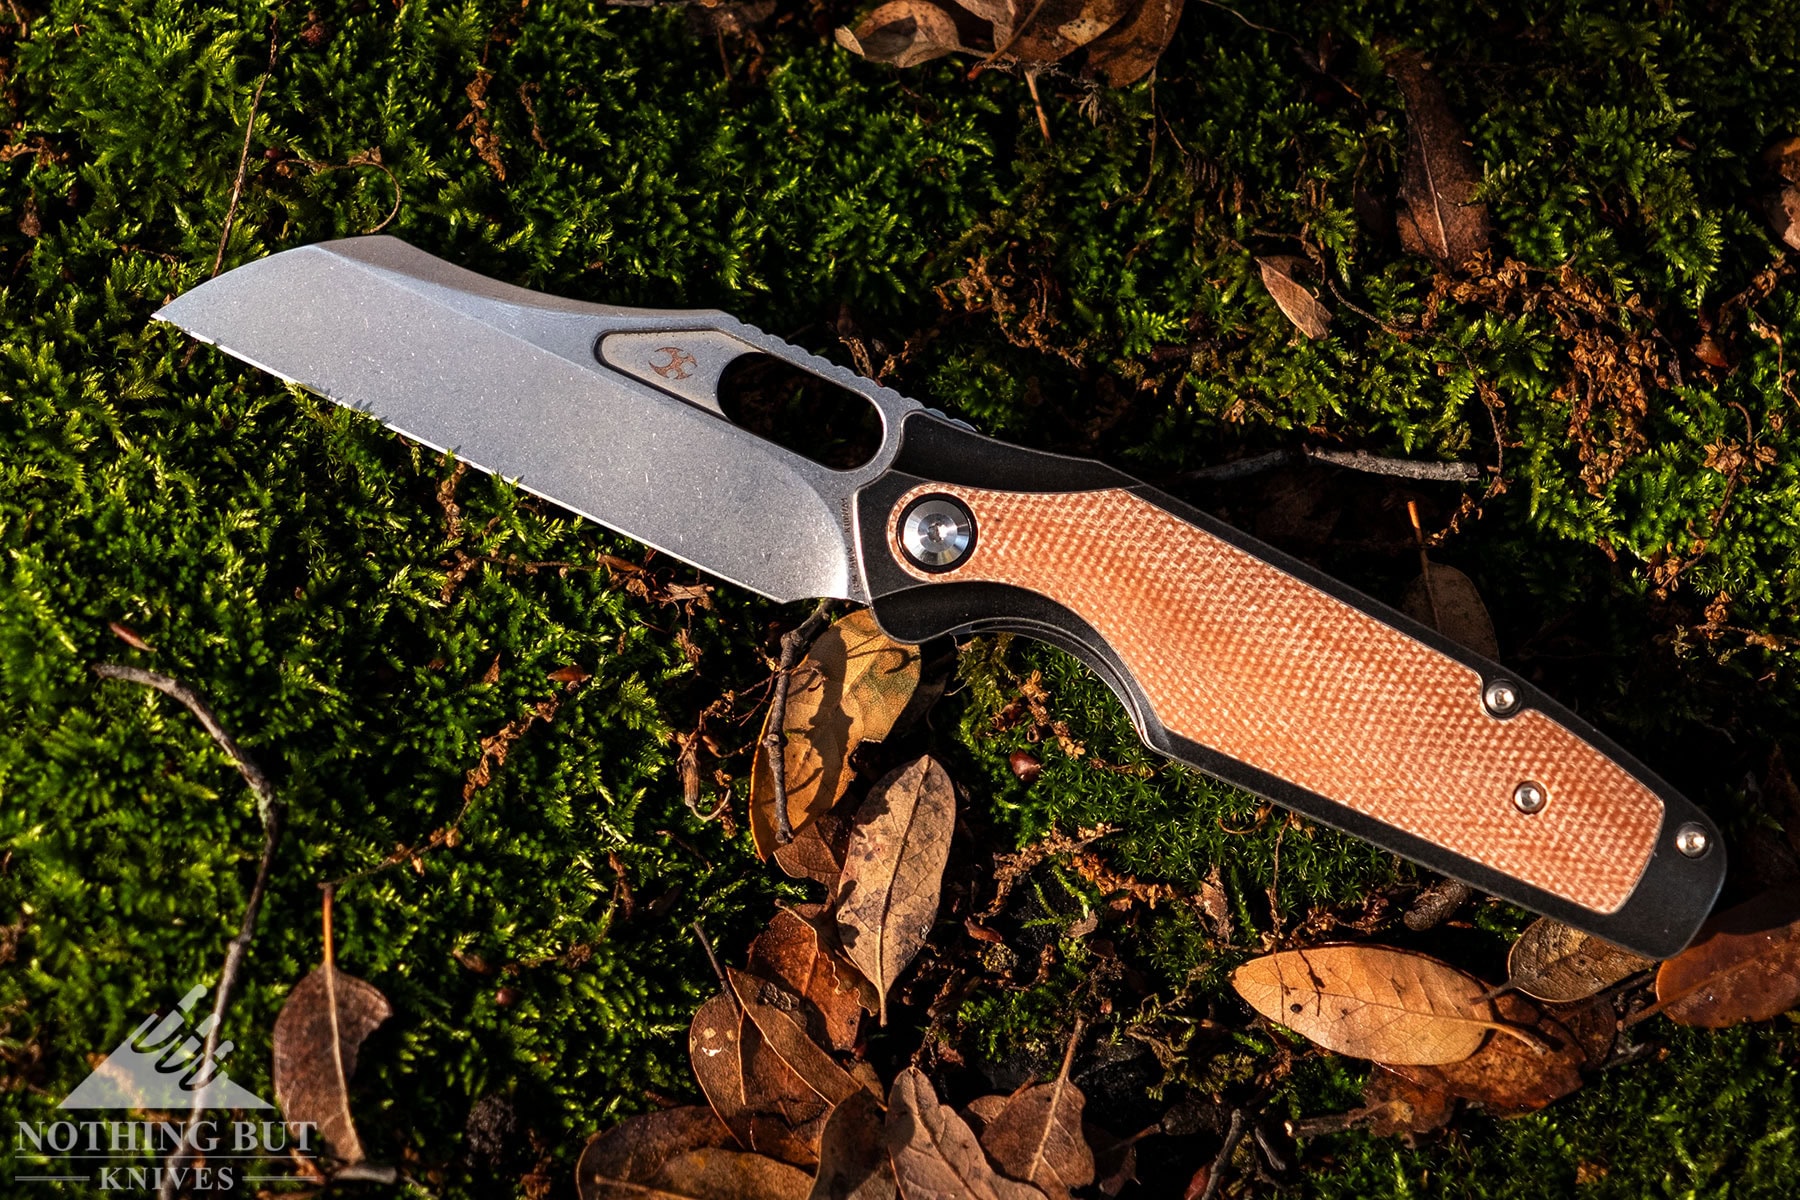 The flat grind blade and tough edge of the Tuckamore is highlighted by the sun.